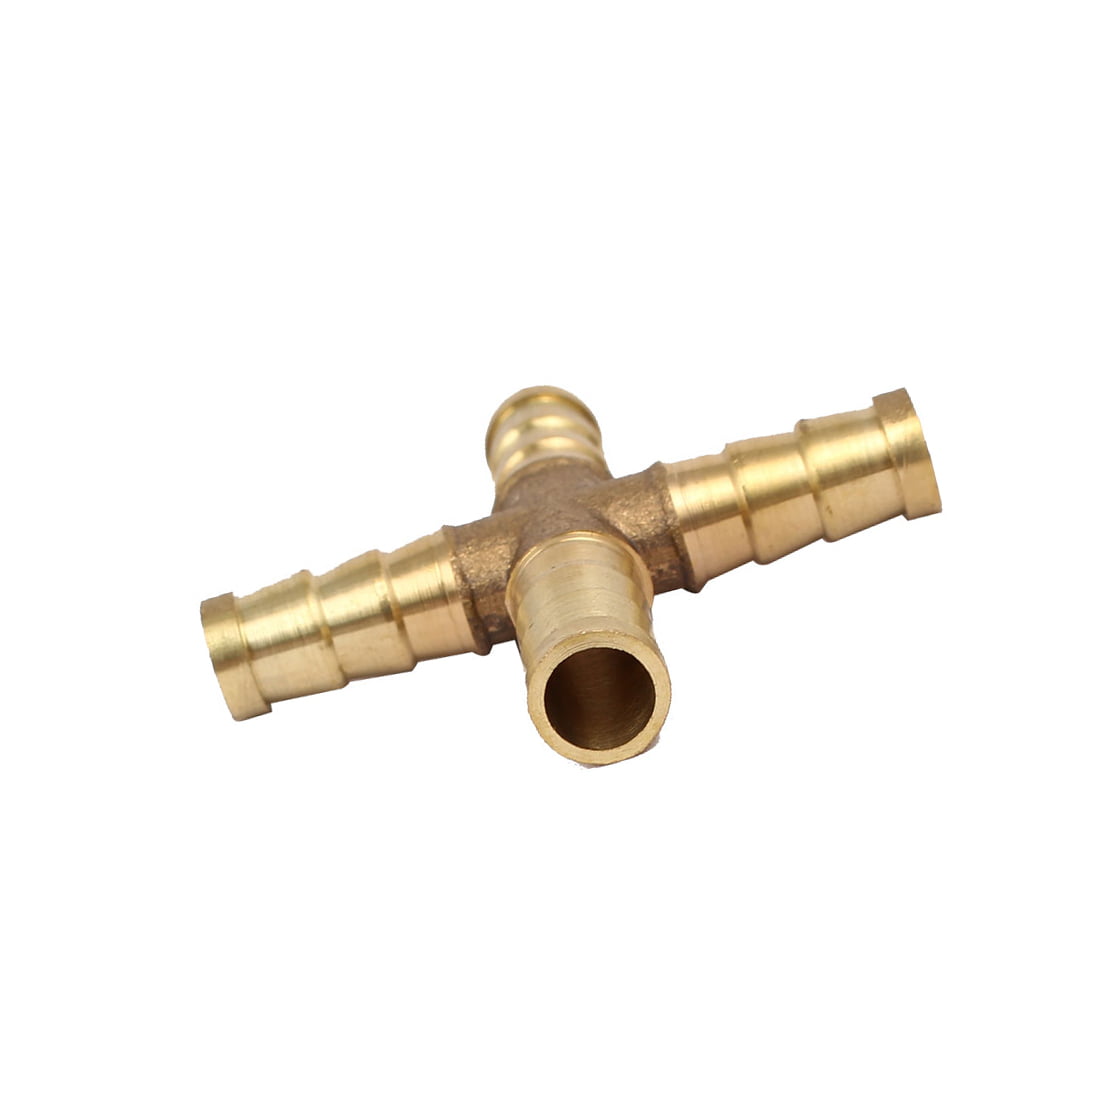 Coupler Connector Adapter with Valve, Jiaqi-cnnectors Fuel Gas Water 8mm Hose Barb Y Type Brass Barbed Tube Pipe Fitting 